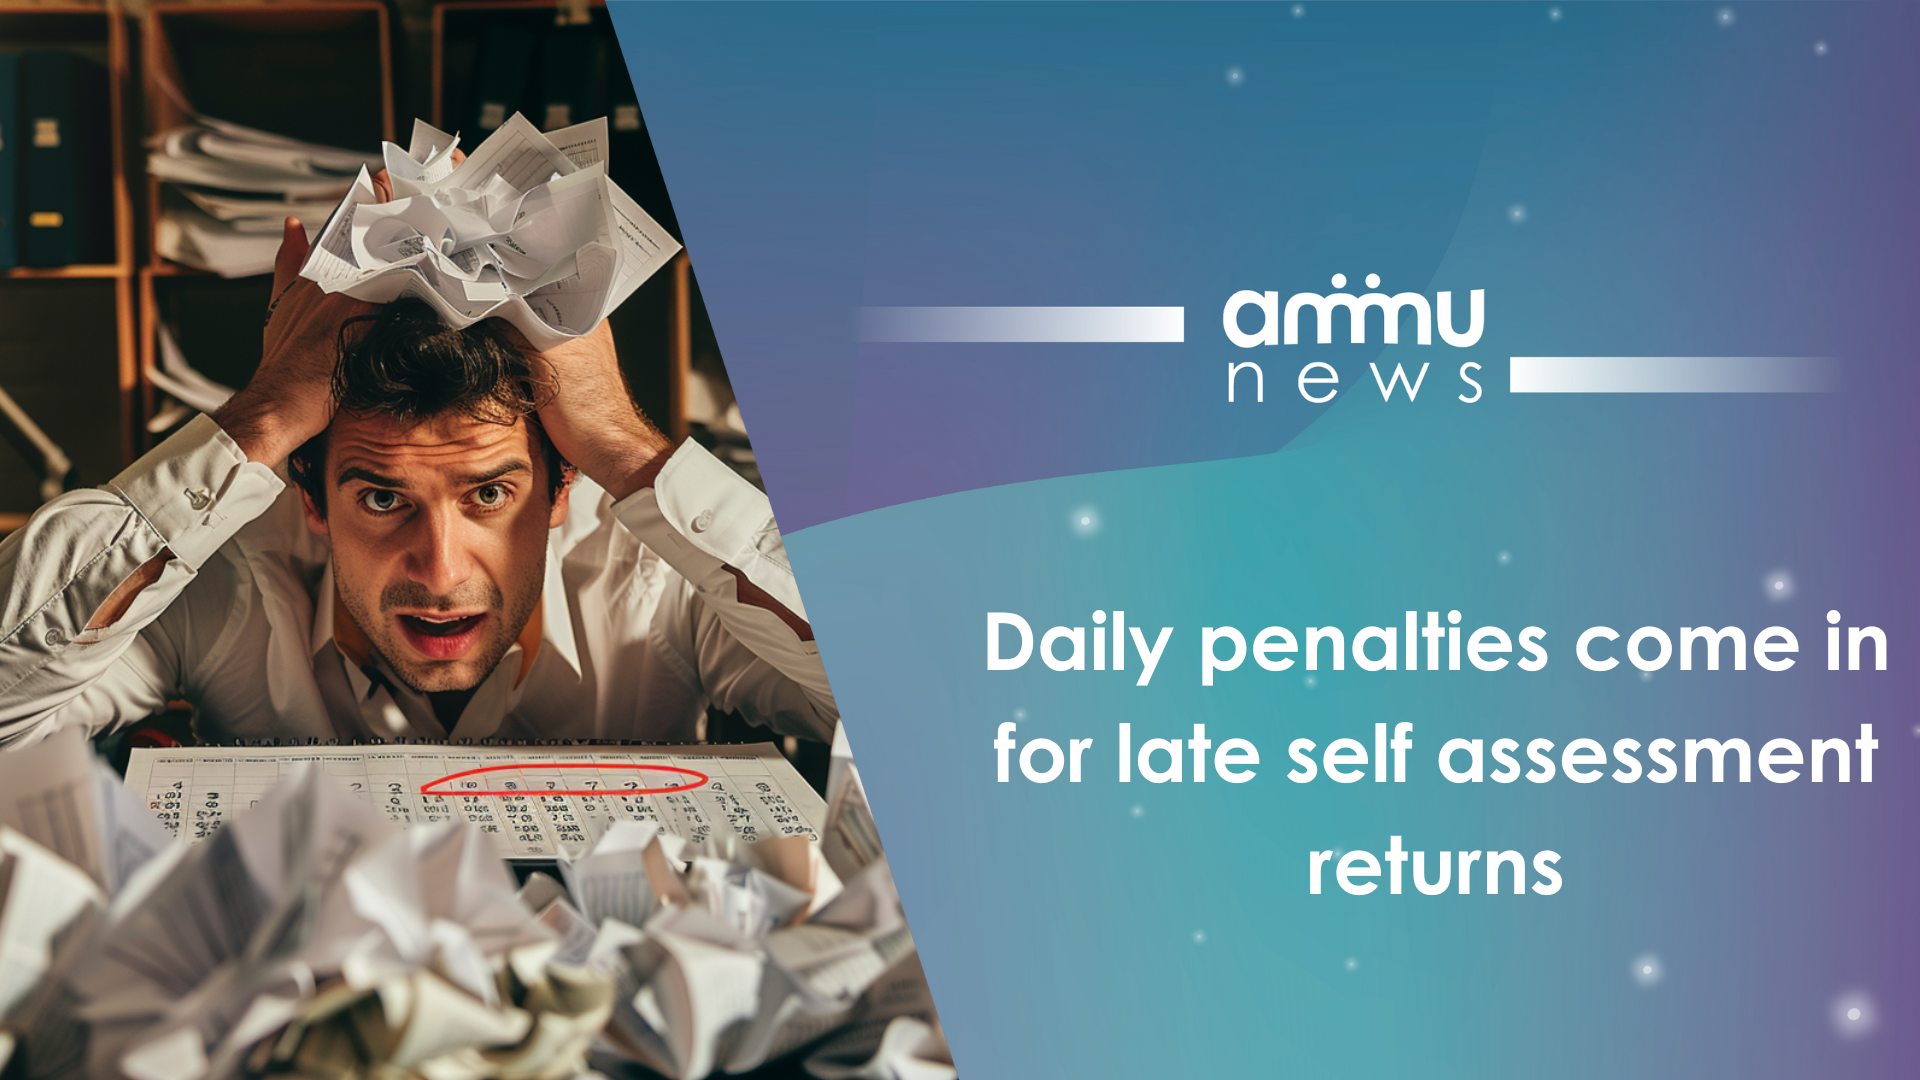 Daily penalties come in for late self assessment returns